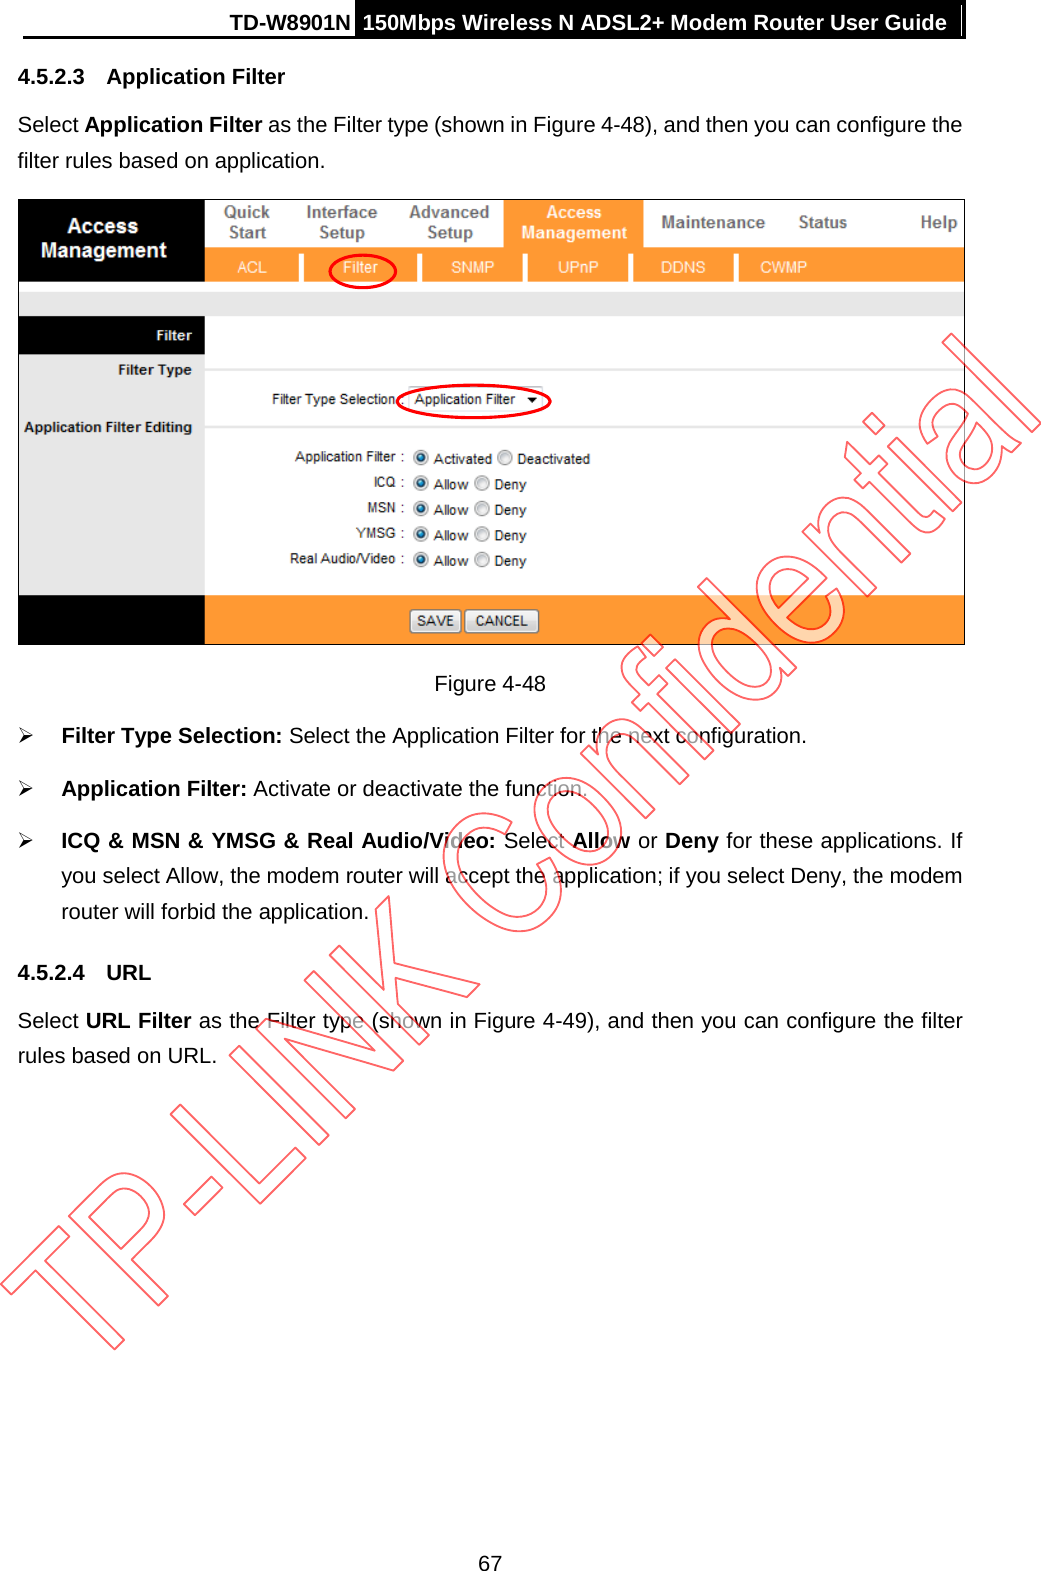 TD-W8901N 150Mbps Wireless N ADSL2+ Modem Router User Guide  4.5.2.3 Application Filter Select Application Filter as the Filter type (shown in Figure 4-48), and then you can configure the filter rules based on application.  Figure 4-48  Filter Type Selection: Select the Application Filter for the next configuration.  Application Filter: Activate or deactivate the function.  ICQ &amp; MSN &amp; YMSG &amp; Real Audio/Video: Select Allow or Deny for these applications. If you select Allow, the modem router will accept the application; if you select Deny, the modem router will forbid the application. 4.5.2.4 URL Select URL Filter as the Filter type (shown in Figure 4-49), and then you can configure the filter rules based on URL. 67 